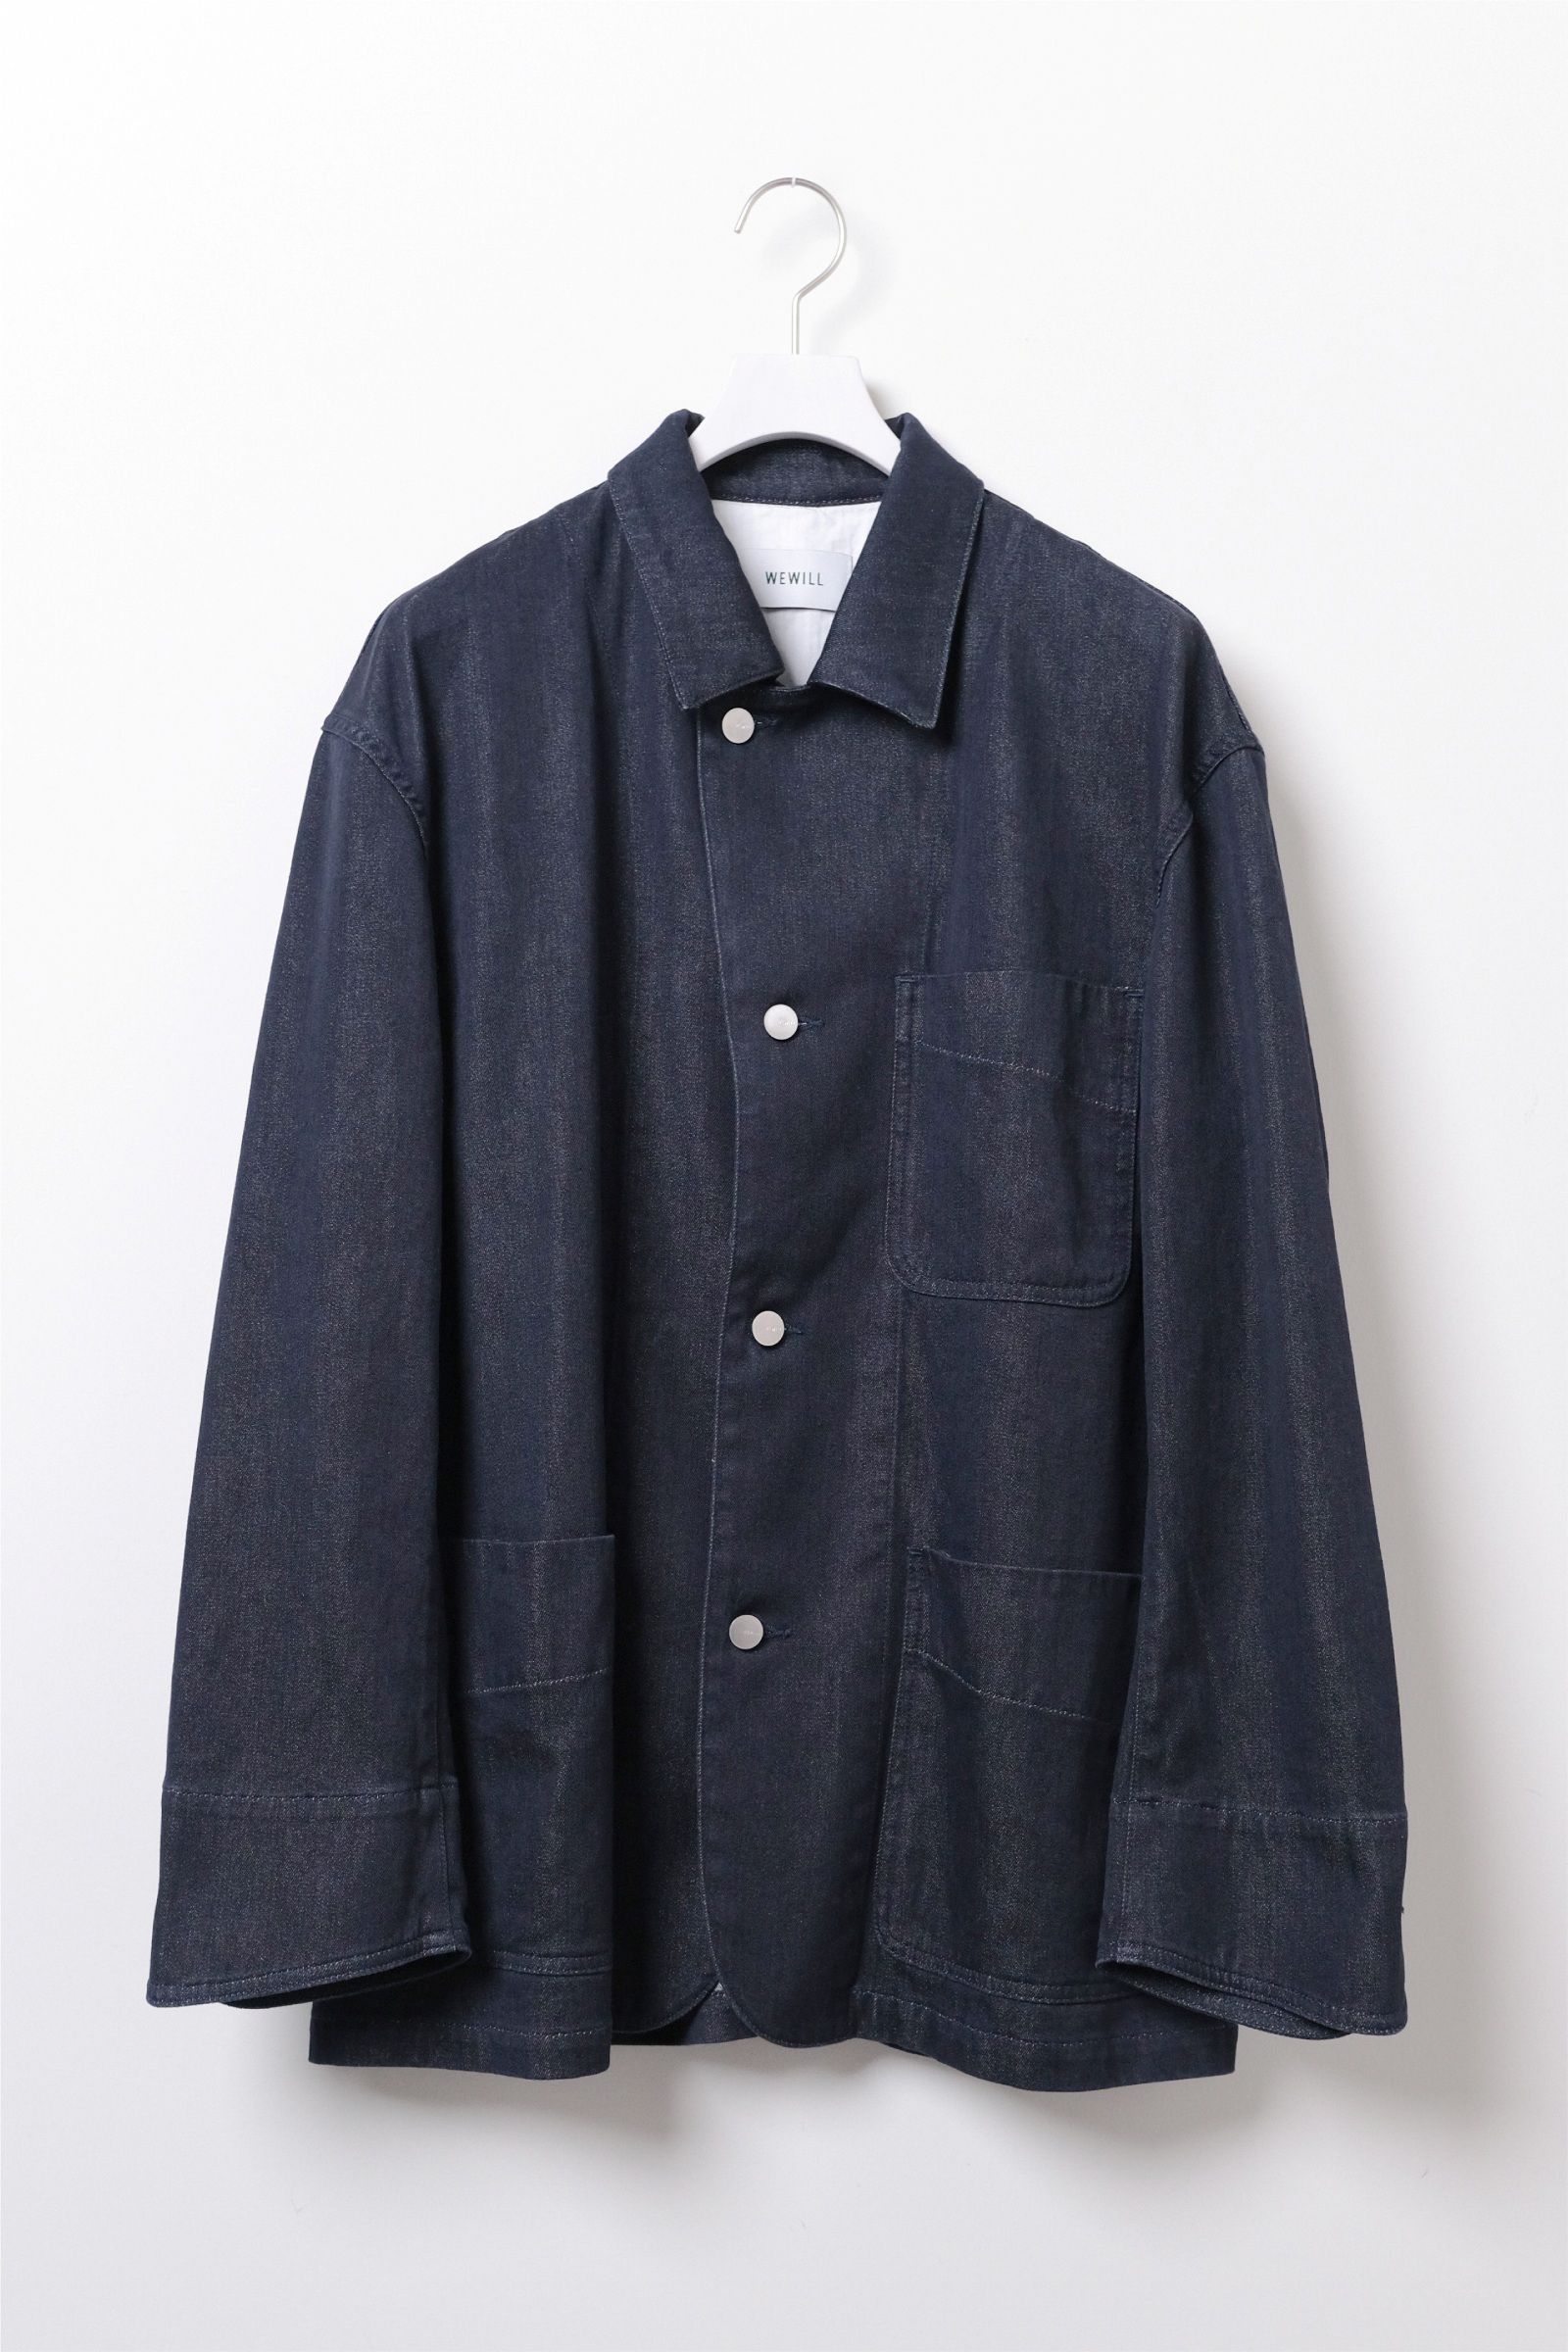 WEWILL - COVERALL JACKET -Navy- 24SS | asterisk